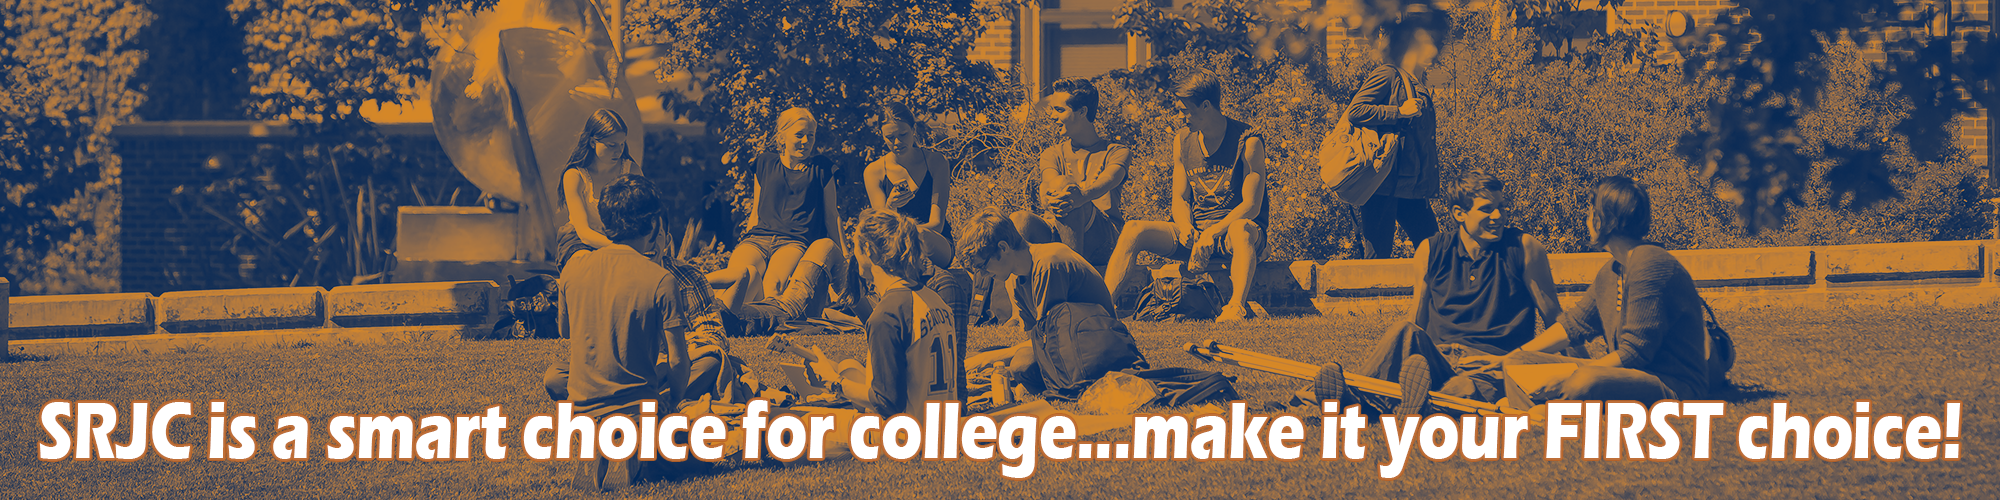 students meeting in the grass; text: "SRJC is a smart choice for college...make it your FIRST choice!"